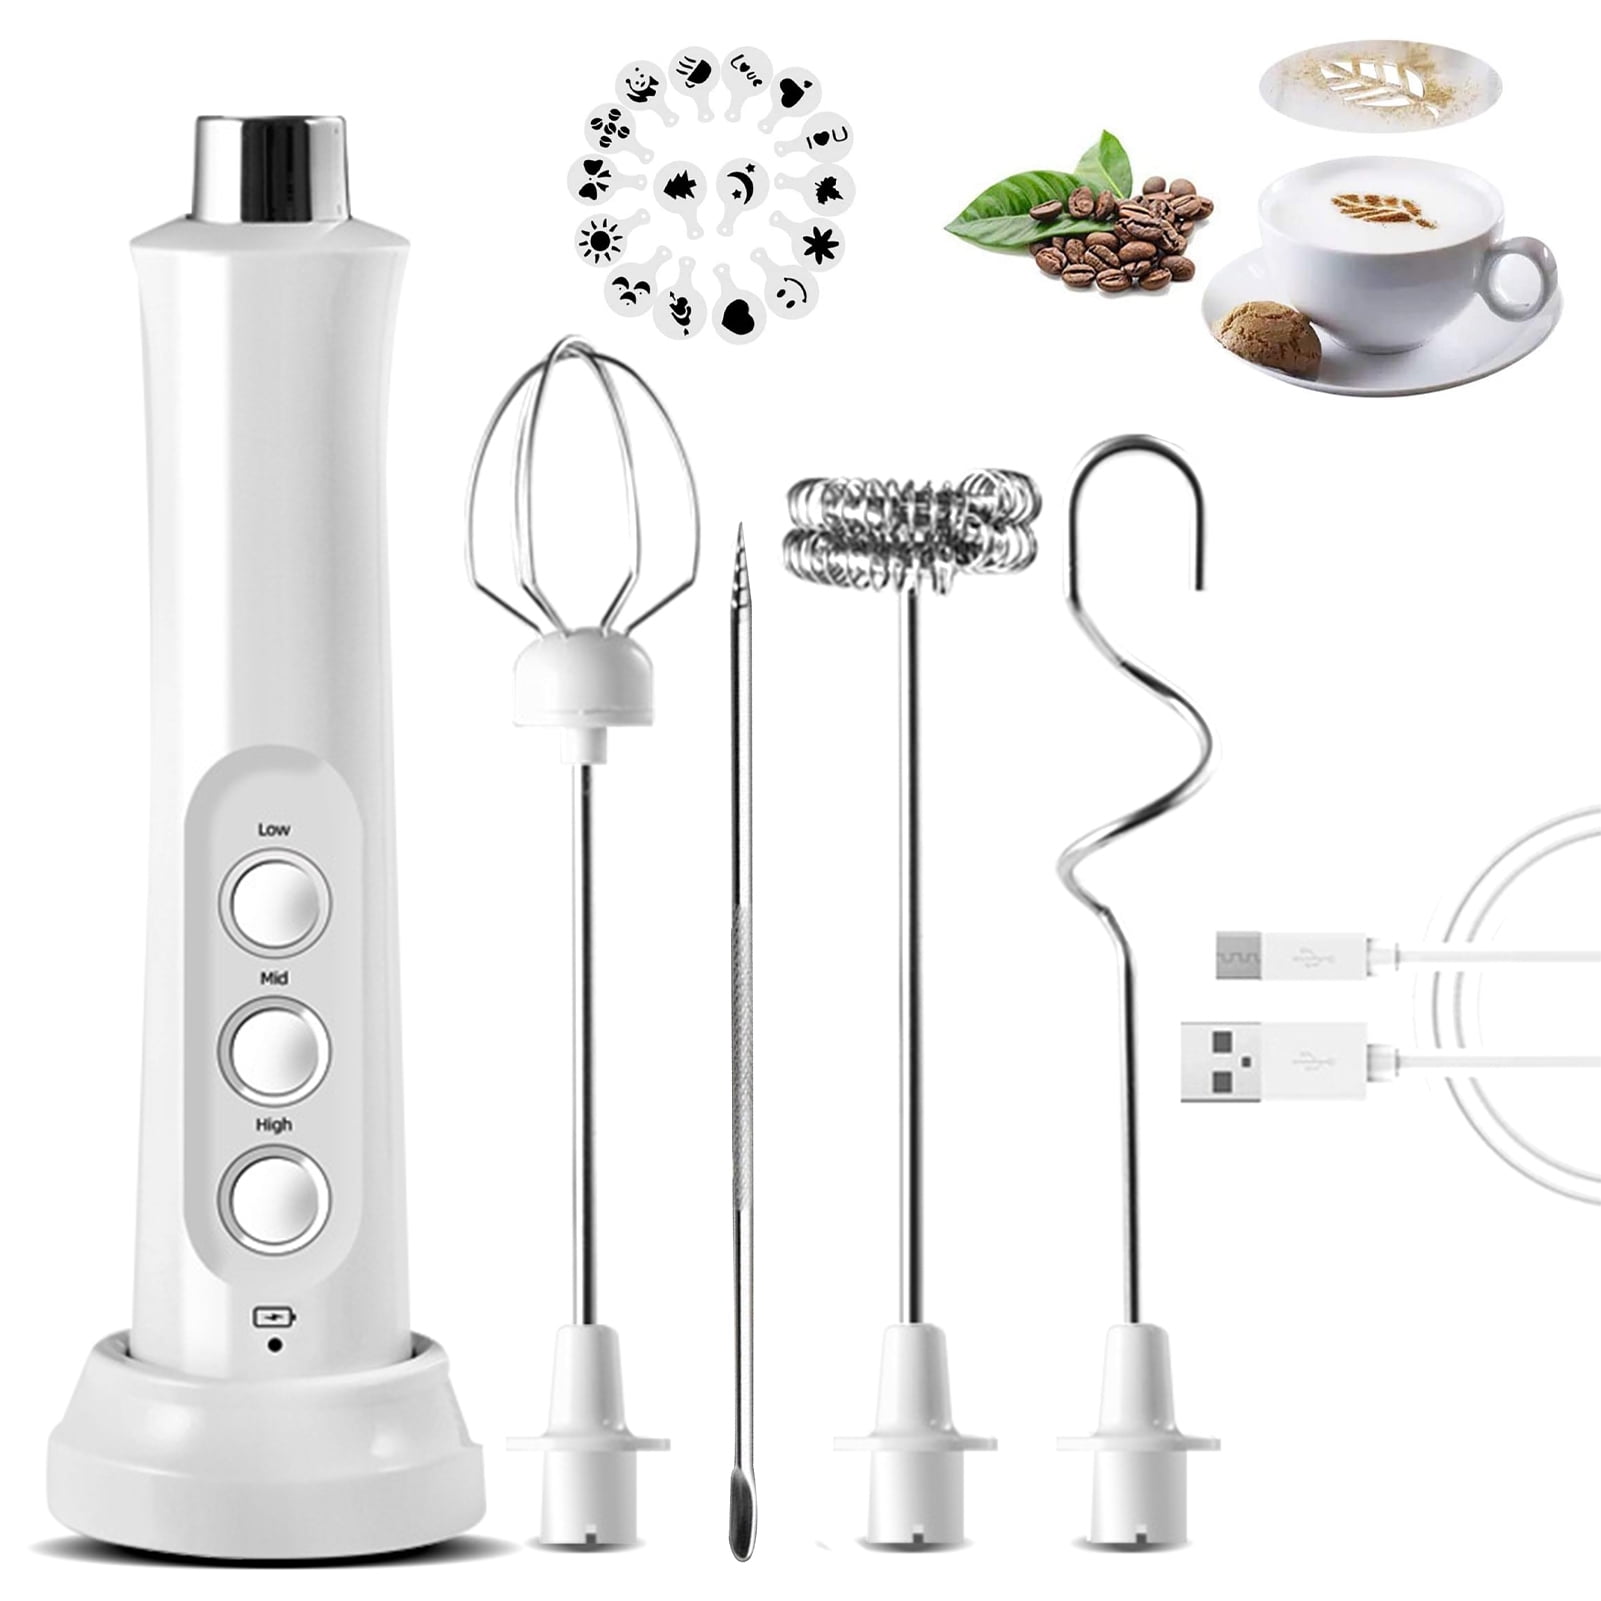 BreaDeep Milk Frother Handheld with 2 Heads, Coffee Whisk Foam Mixer with  USB Rechargeable 3 Speeds, Electric Mini Hand Blender for Latte,  Cappuccino, Hot Chocolate, Egg - Red 